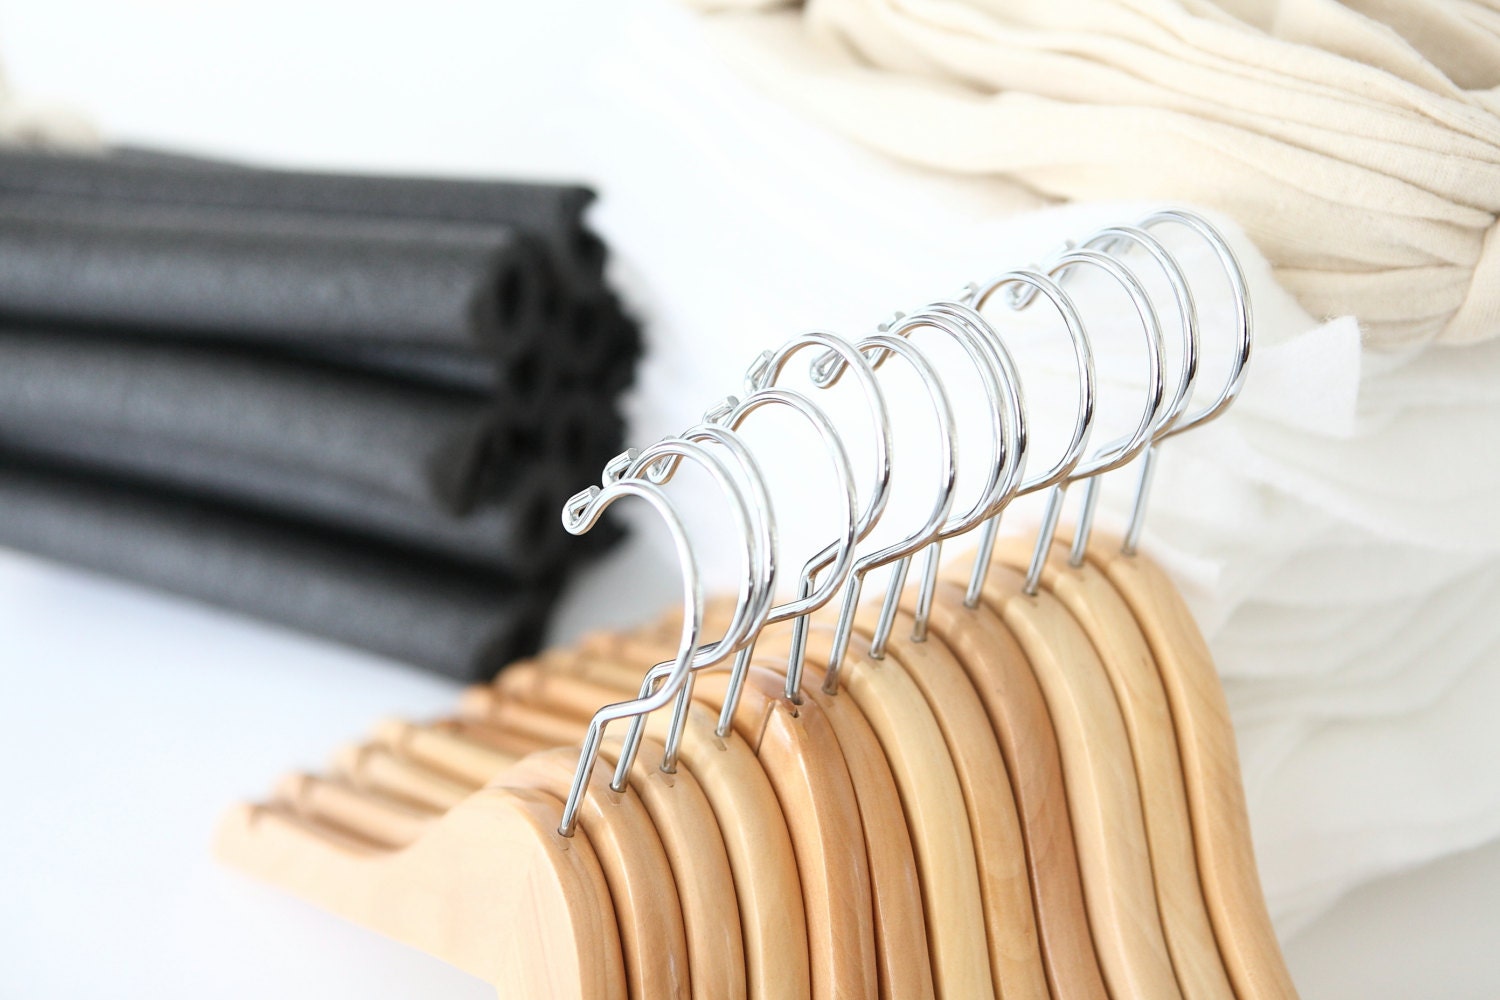 Padded Hanger DIY Kit for Museums Historical Societies Vintage Collections Heirlooms Antiques Knitwear Sweaters Formalwear Closet Organization Preservation and Museum Quality Handmade to Save your Clothes 